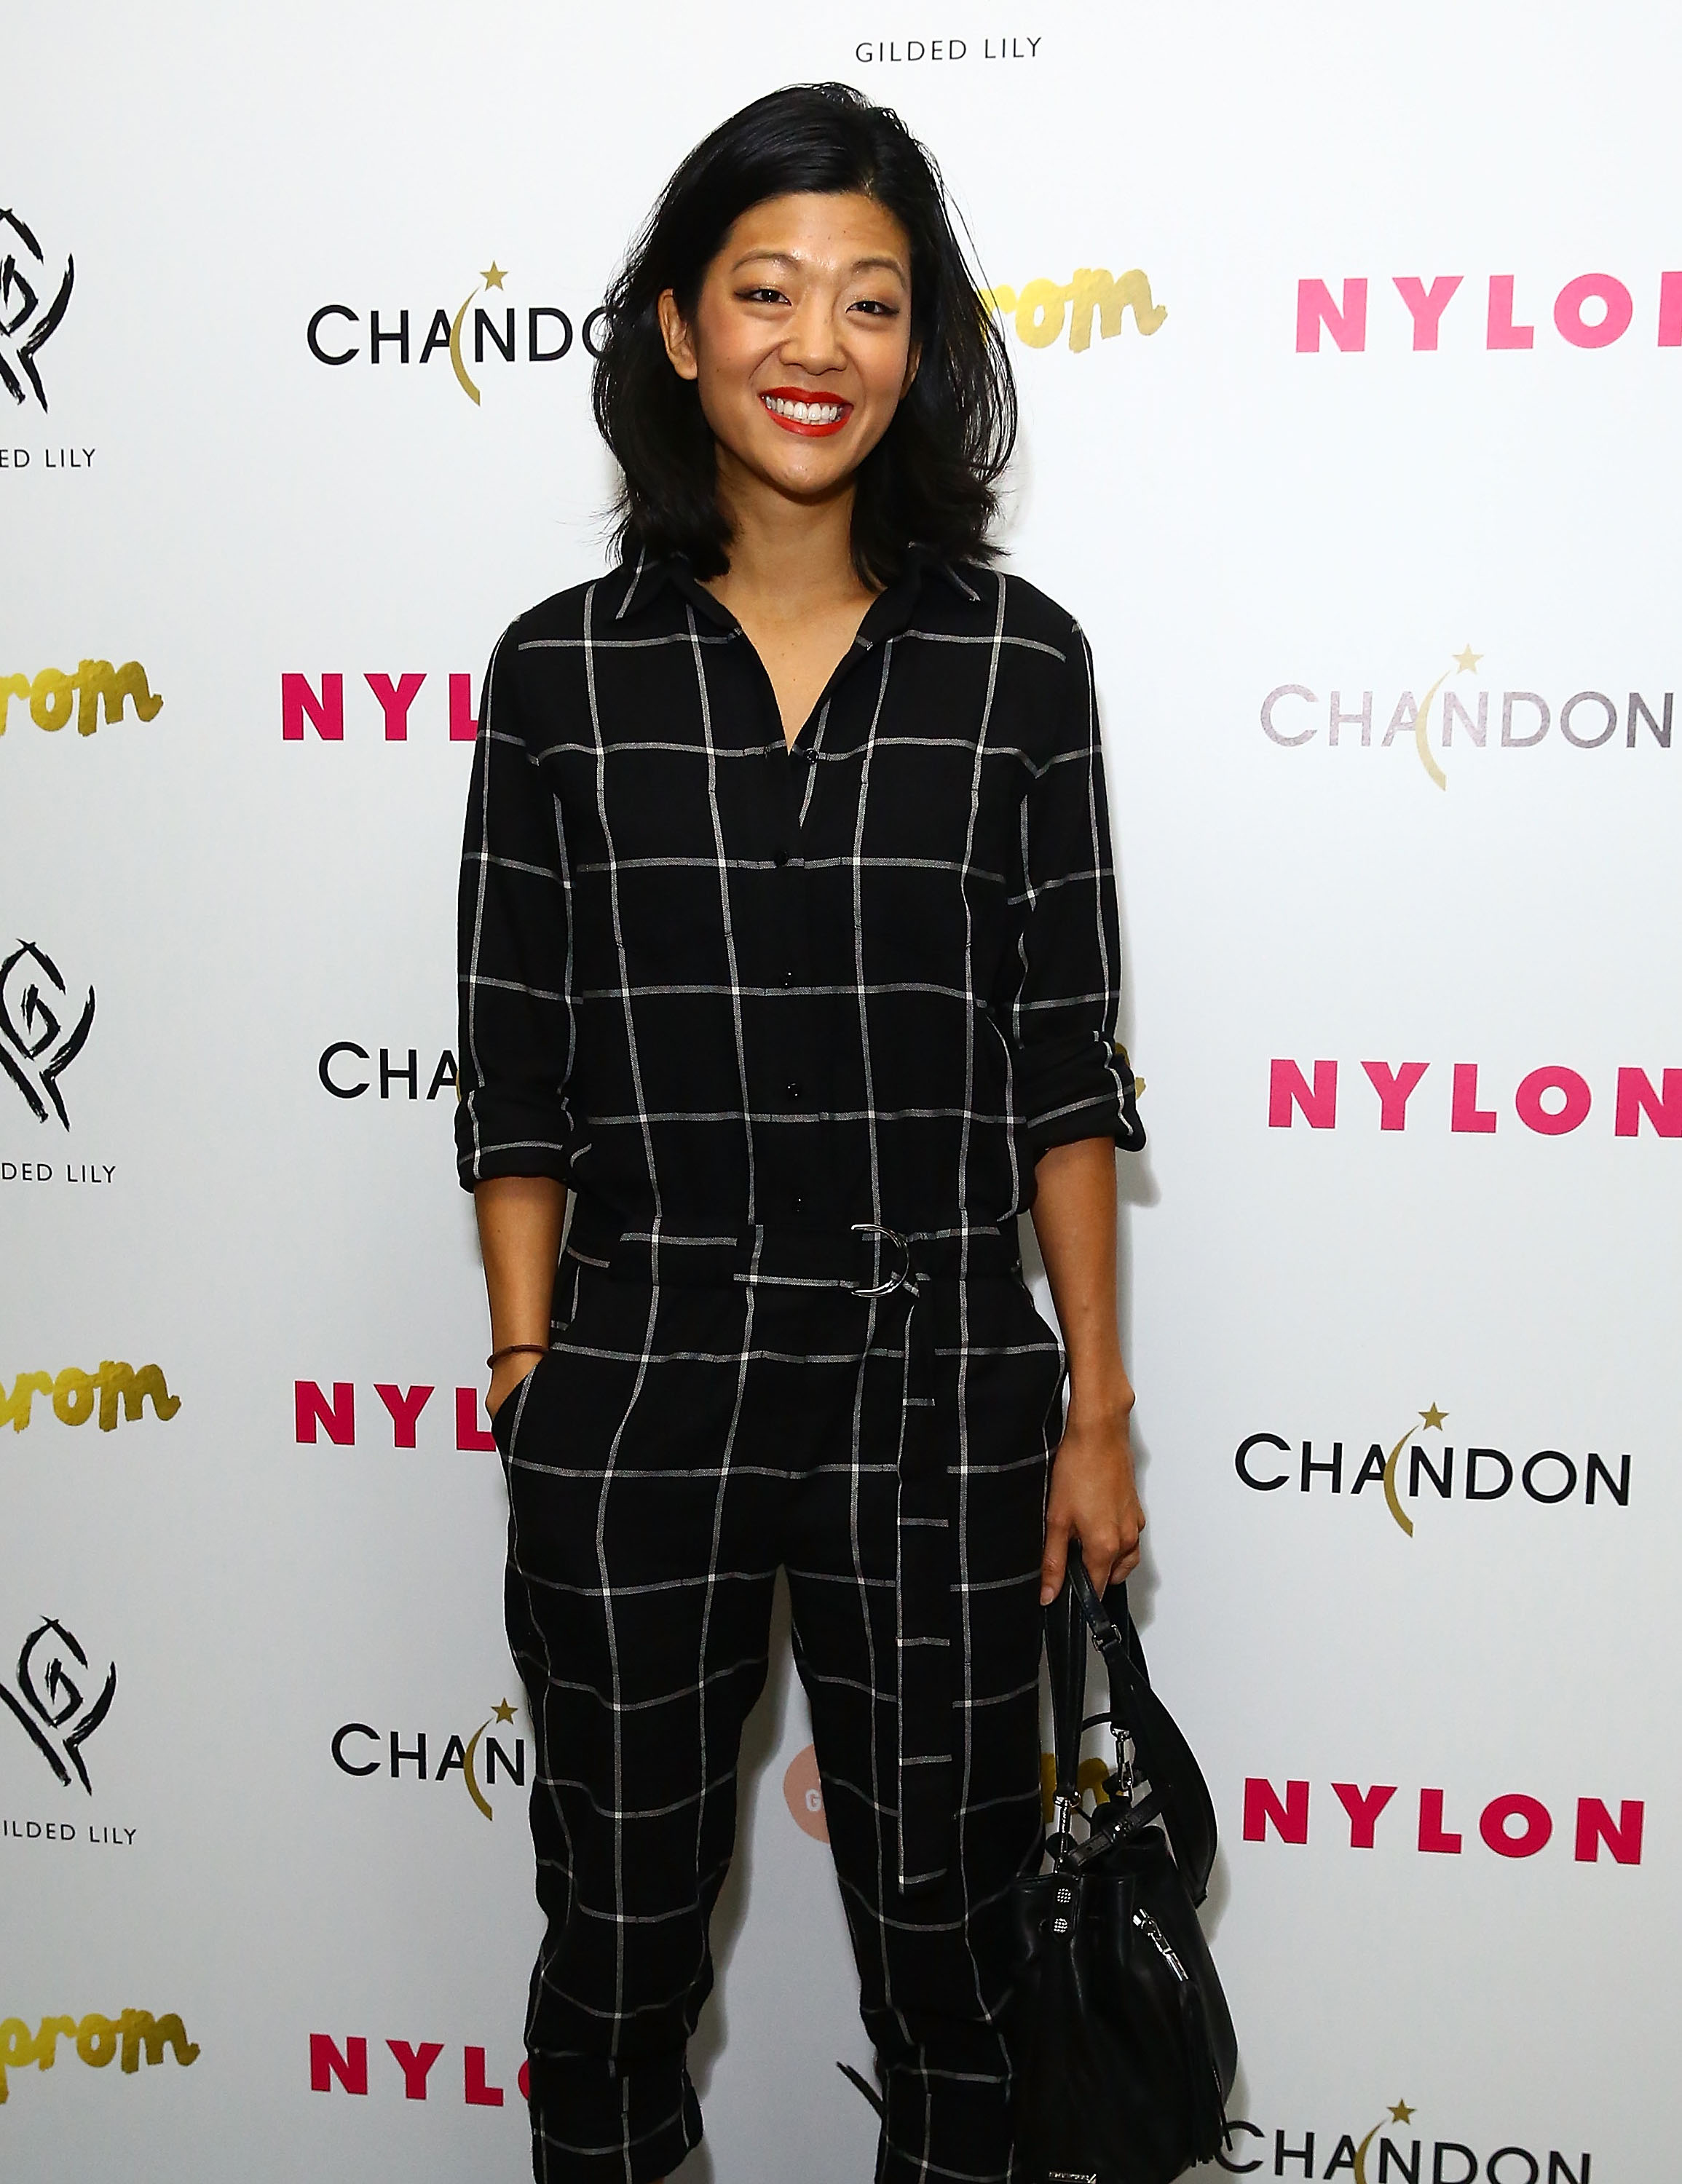 Nylon EIC Michelle Lee Steps Down - Daily Front Row